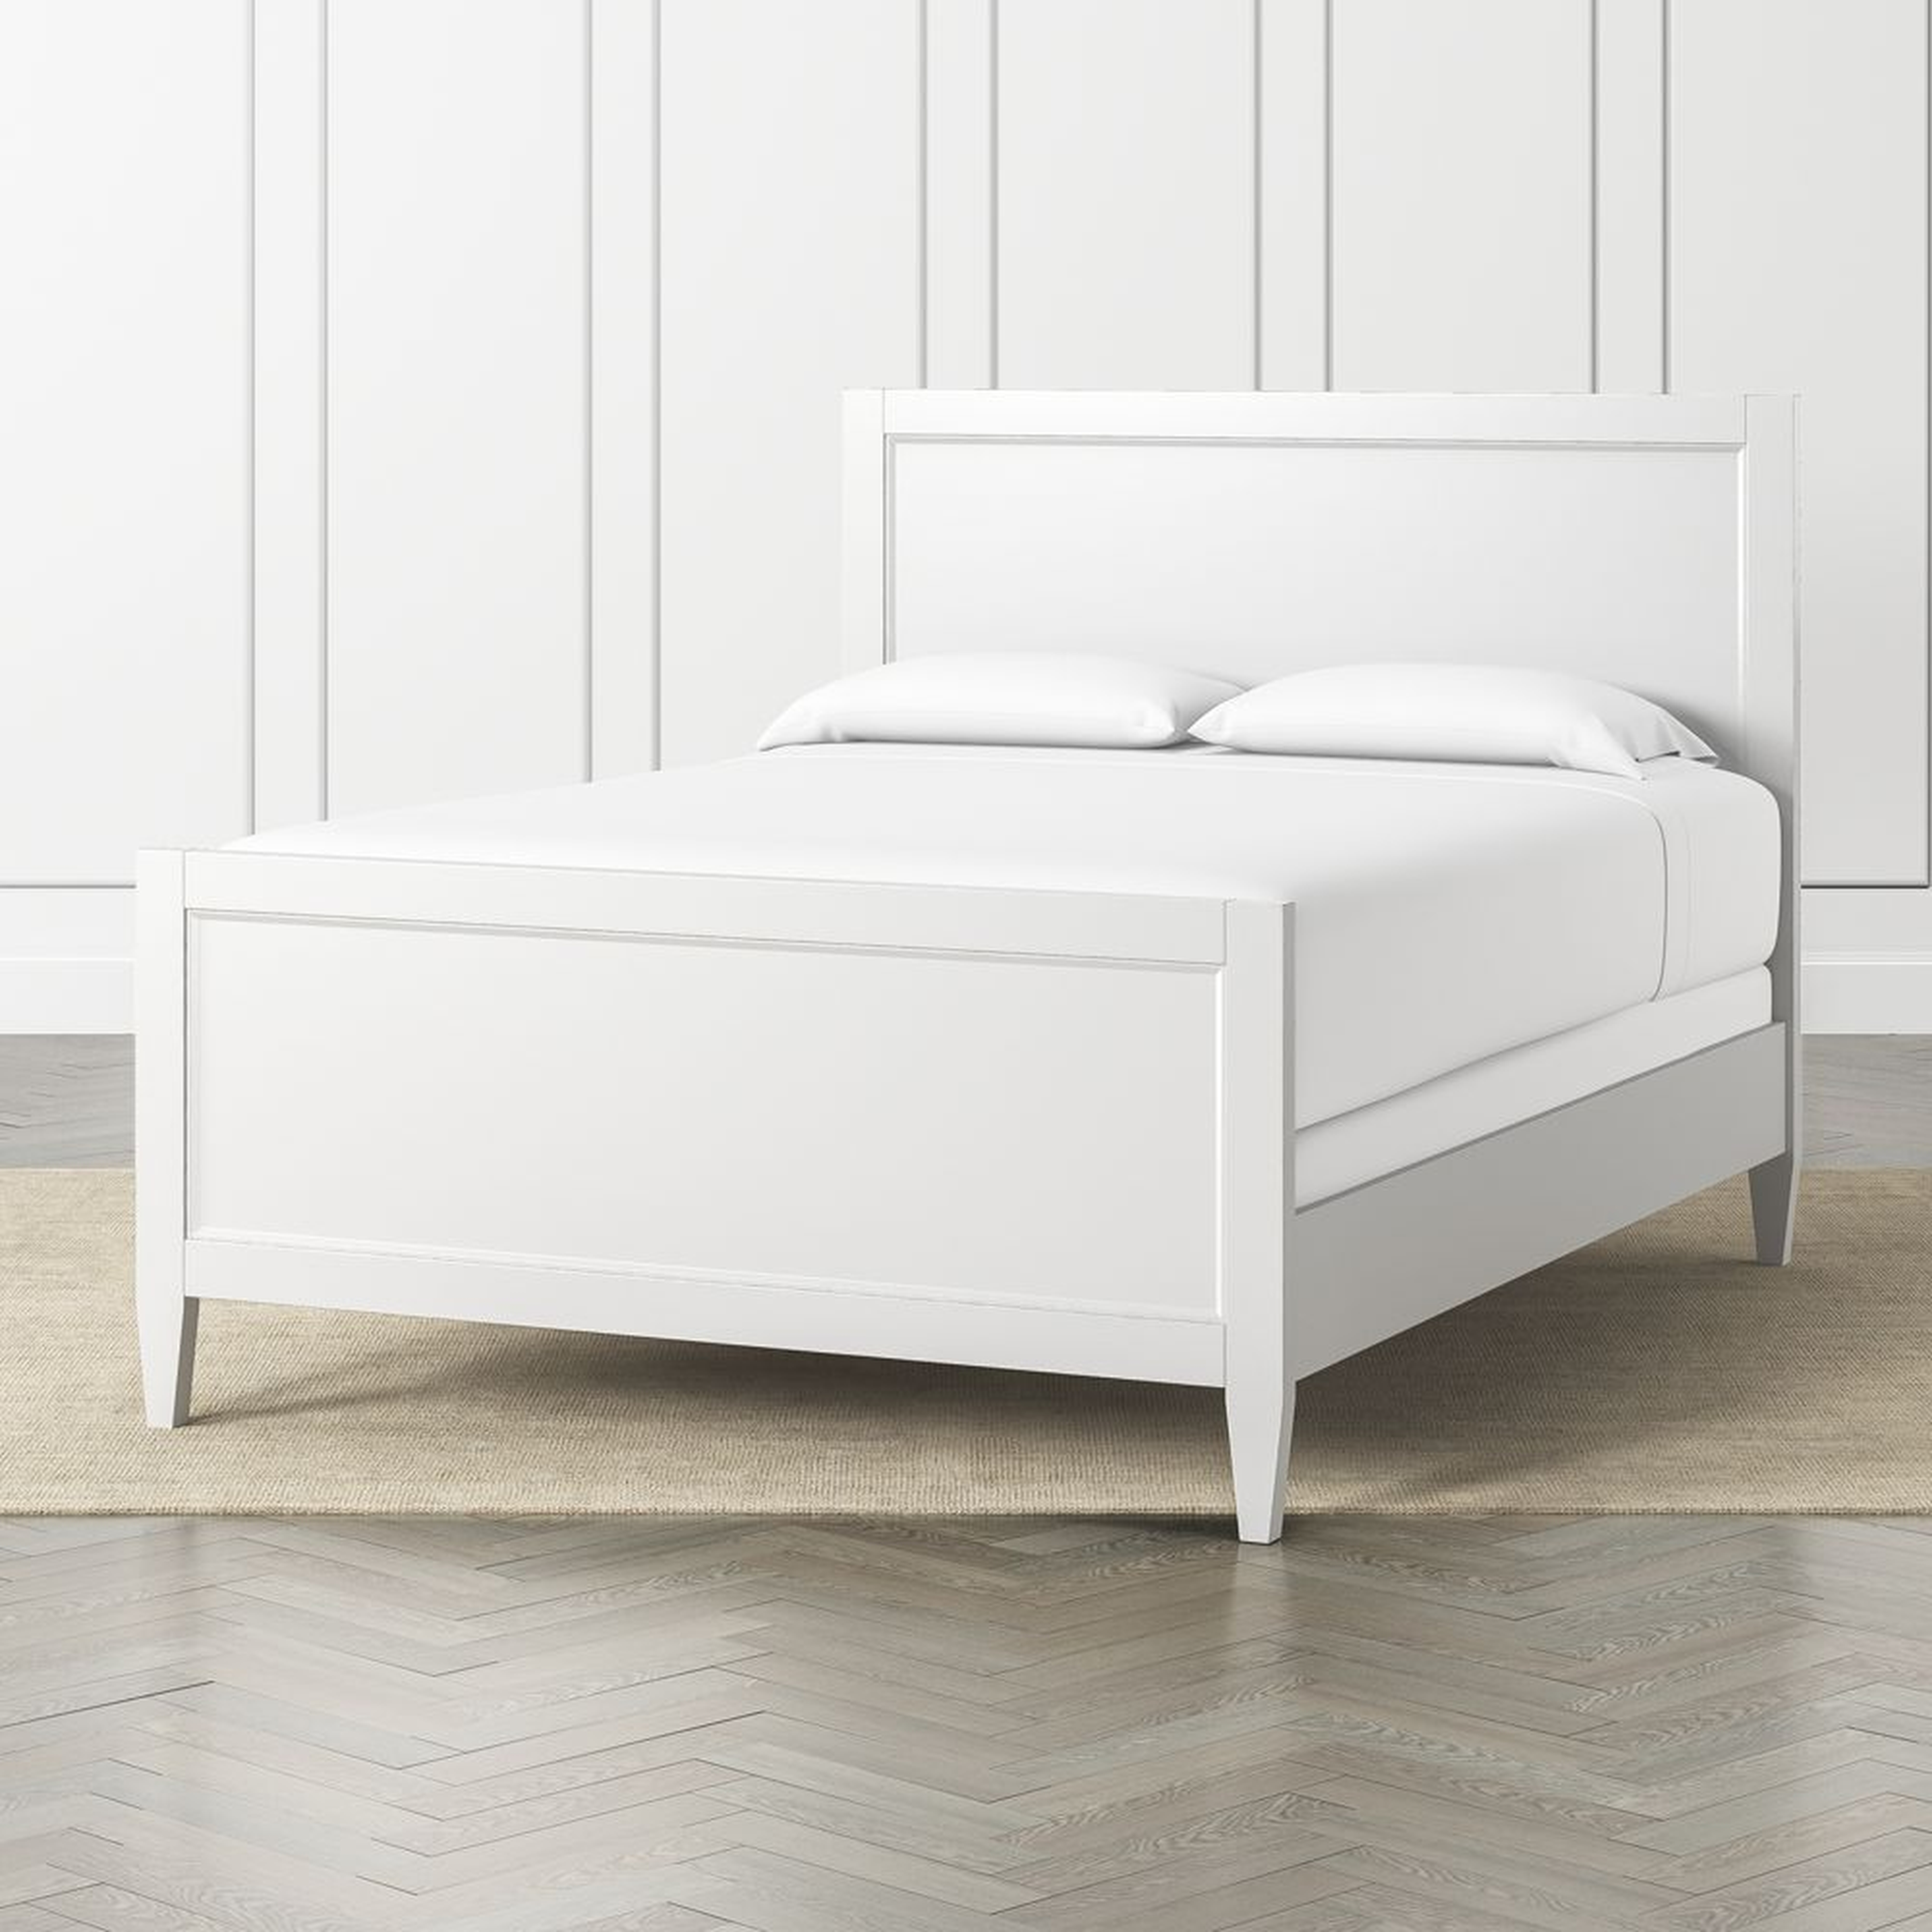 Harbor White Queen Bed - Crate and Barrel